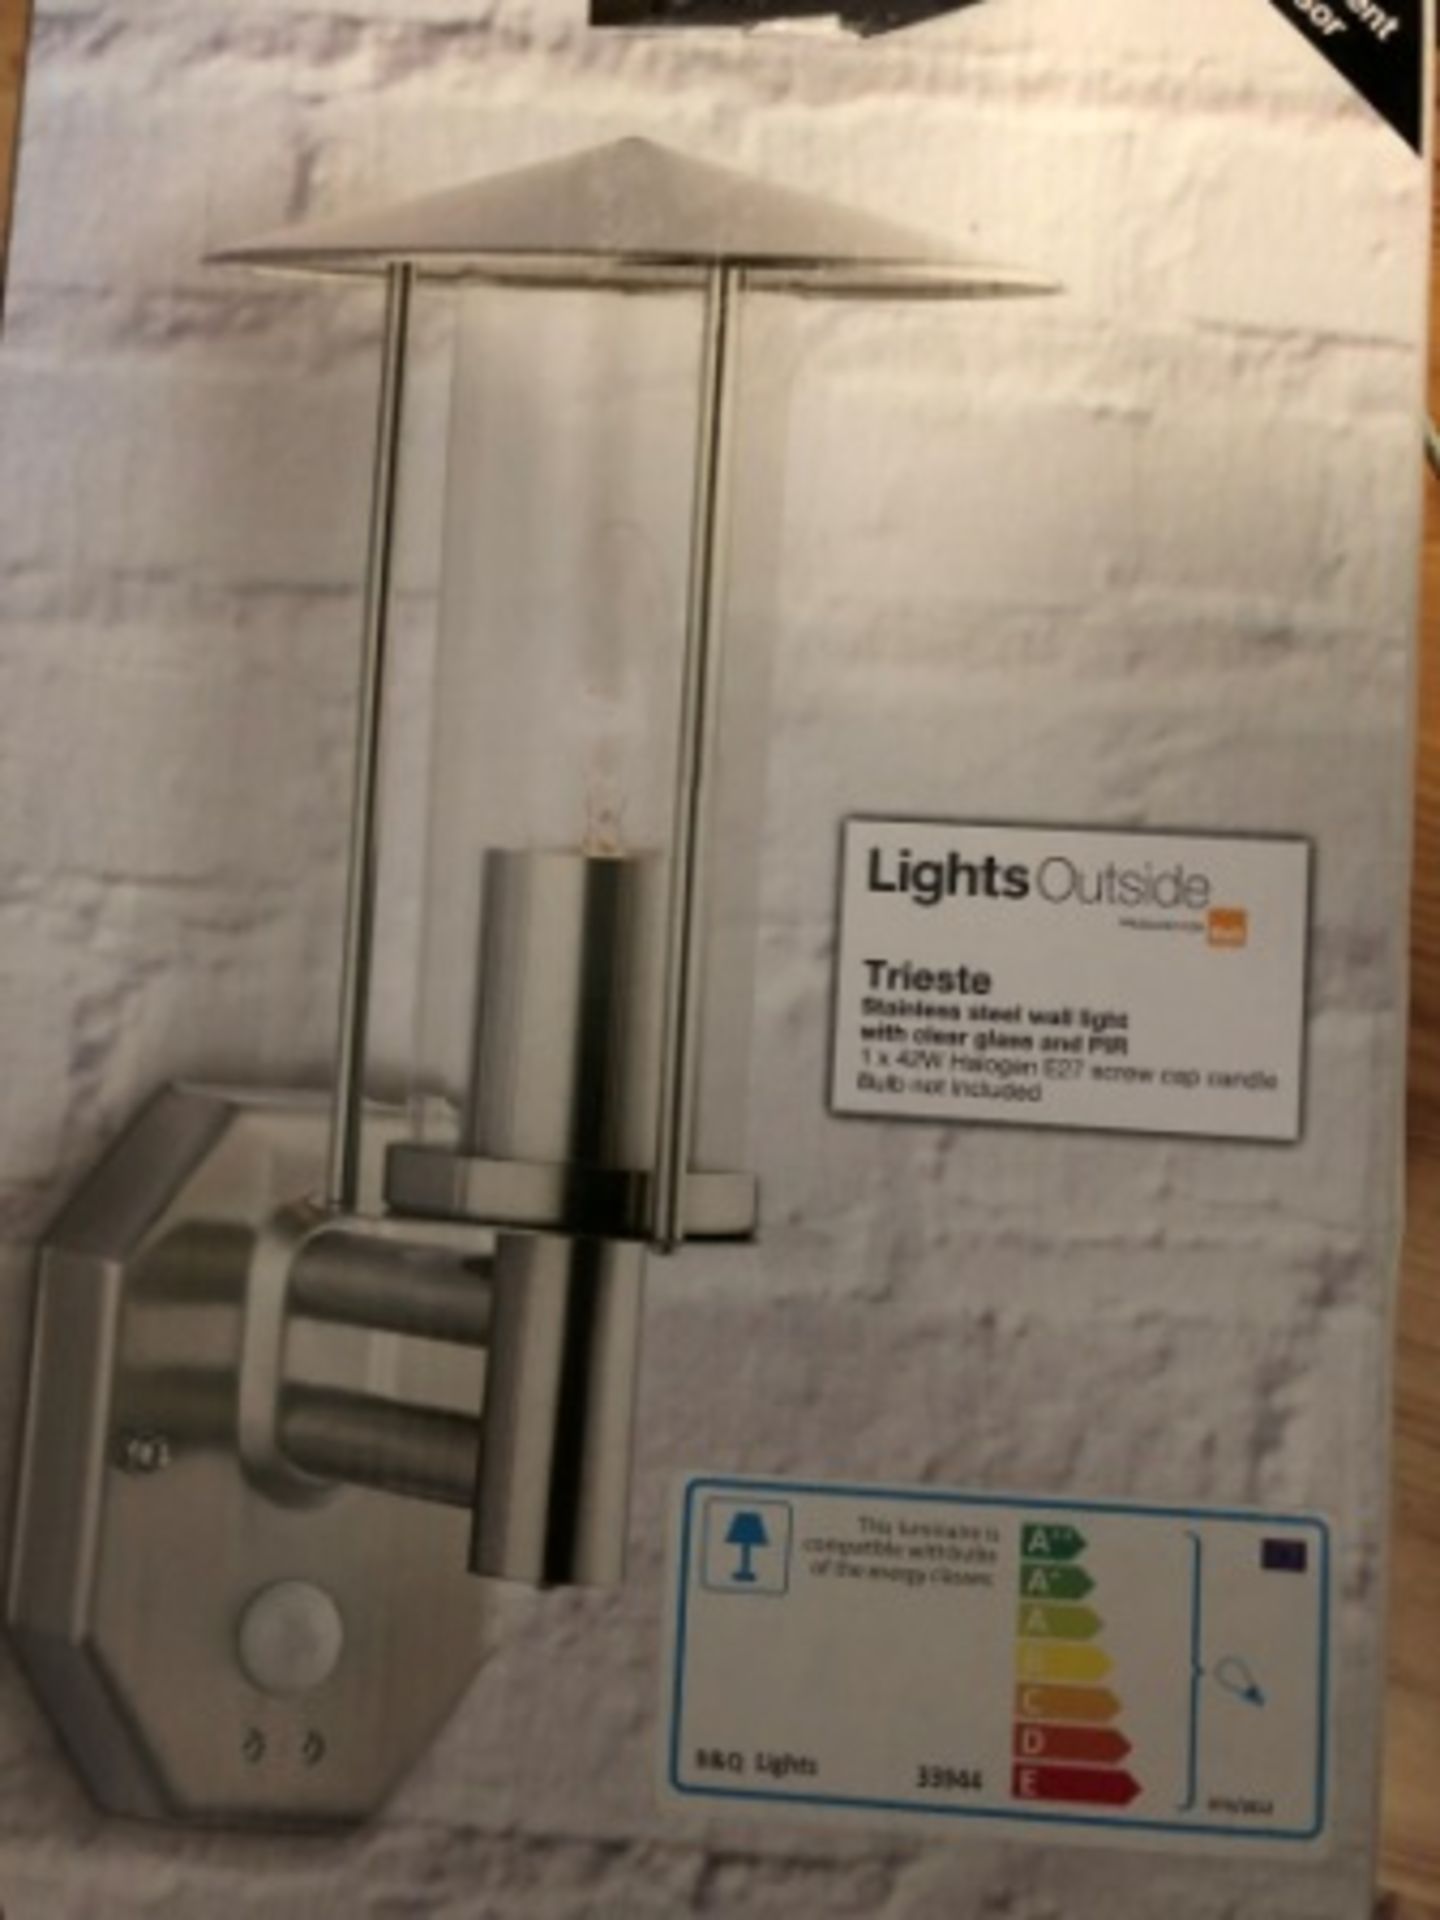 1X STAINLESS STEEL WALL LIGHT OUTDOORS IP44 RATED WITH MOVEMENT SENSOR TAKES ES LAMP IDEAL FOR LEDS